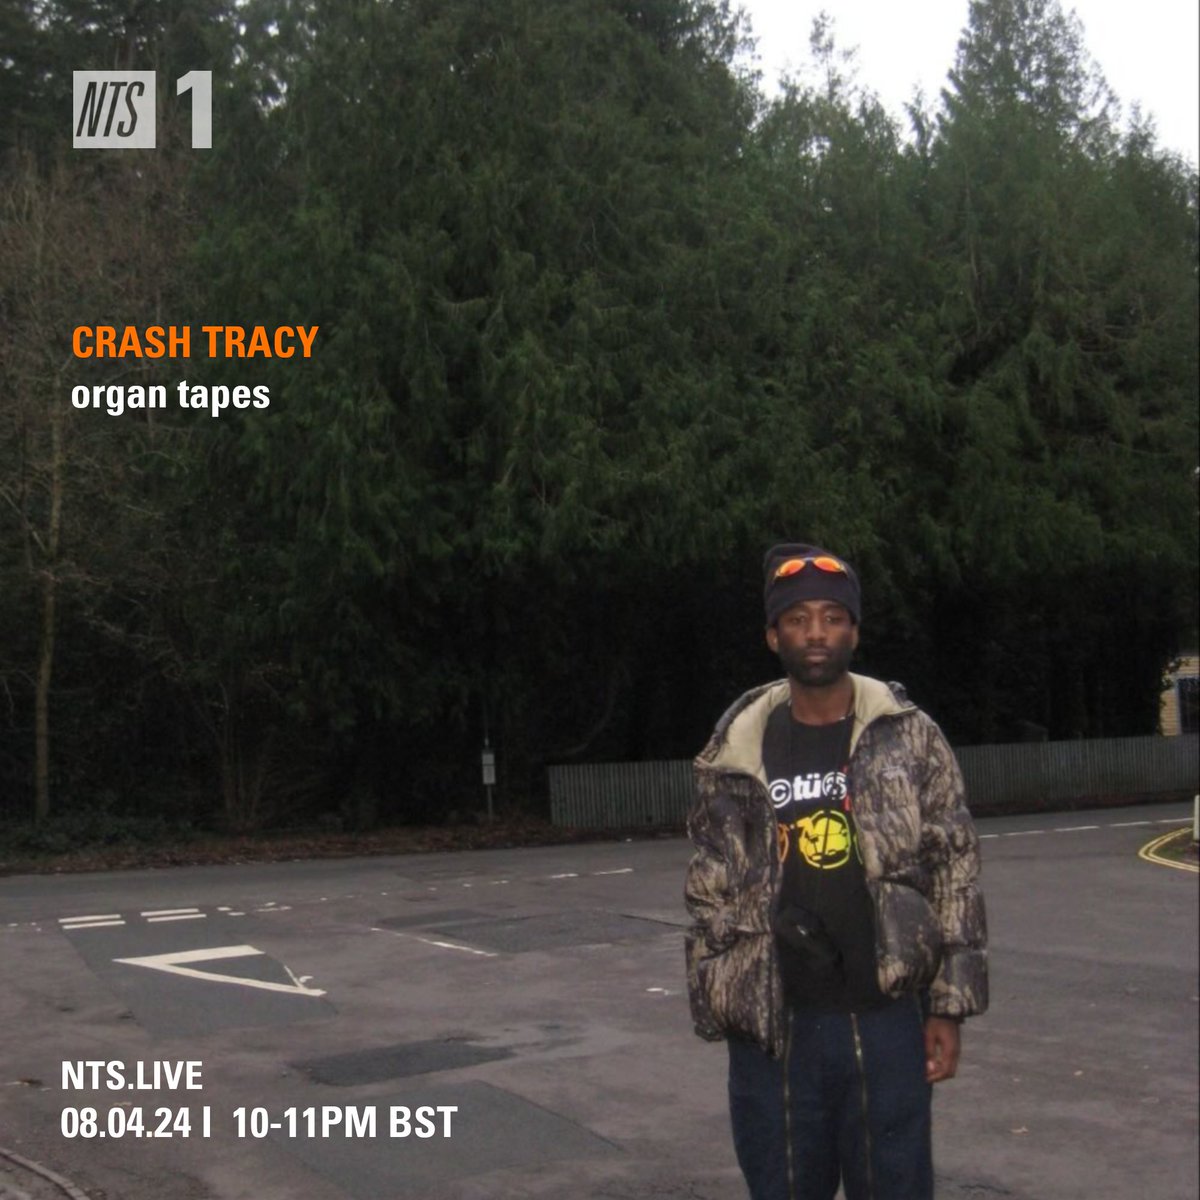 Back on @NTSlive tonight going b2b with Crash Tracy, 10-11pm BST on nts.live 🤝